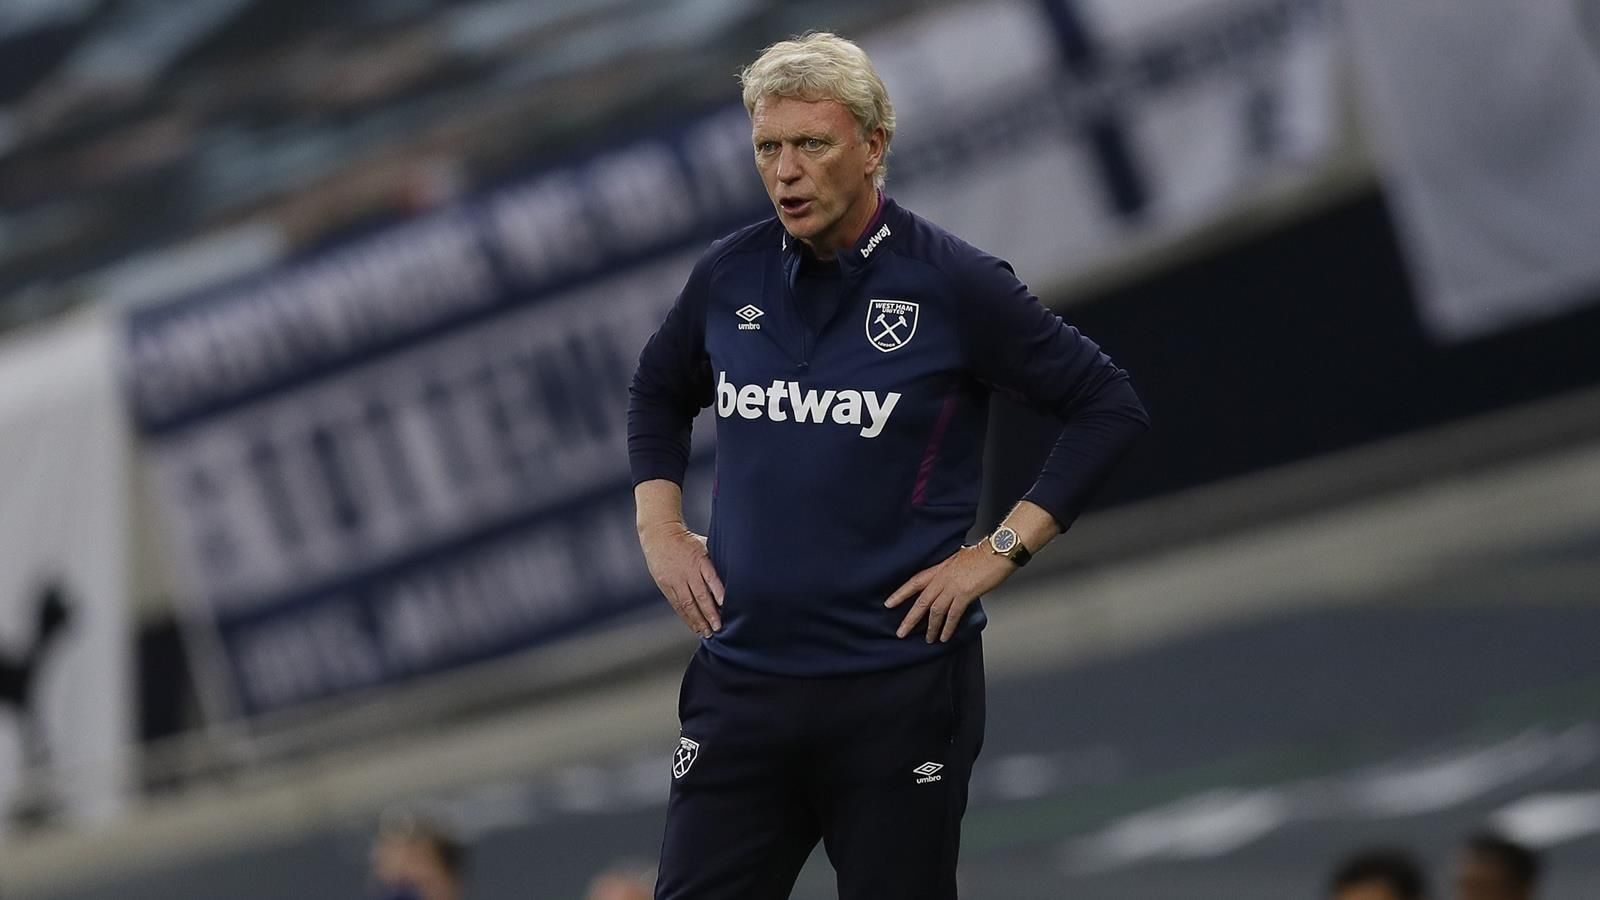 David Moyes warned West Ham that one win is not enough  